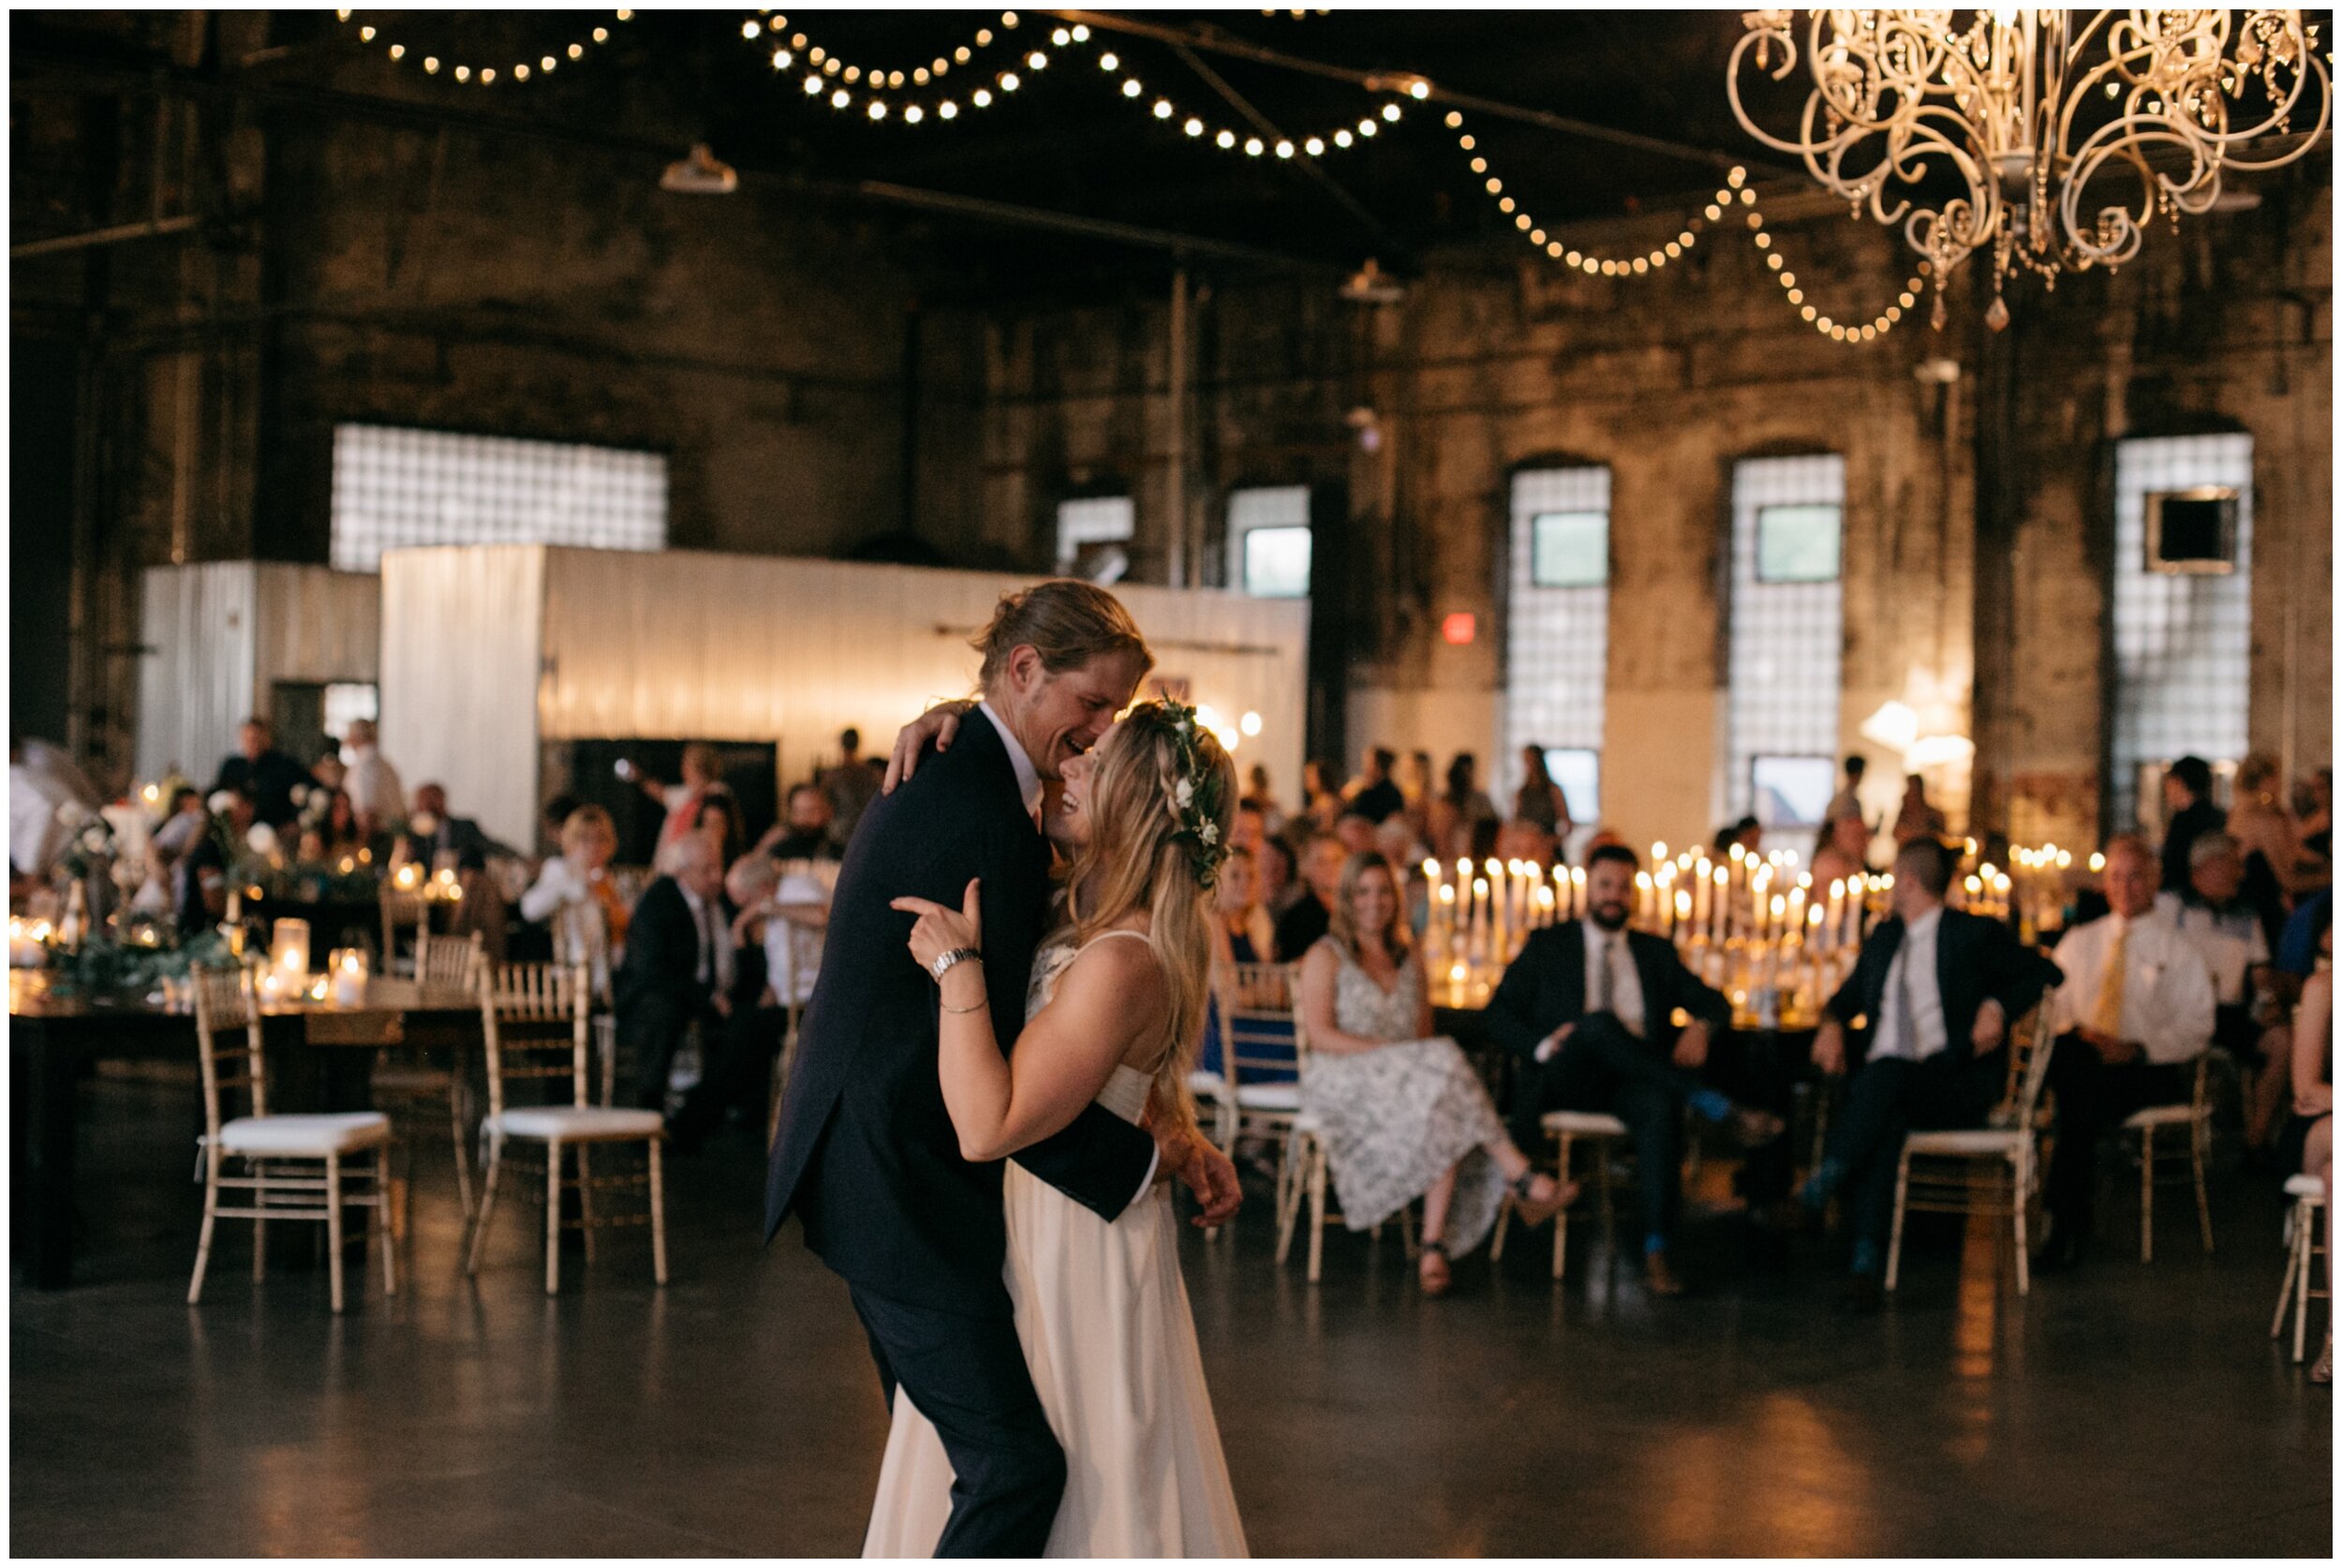 Bride and groom first dance in industrial warehouse wedding venue